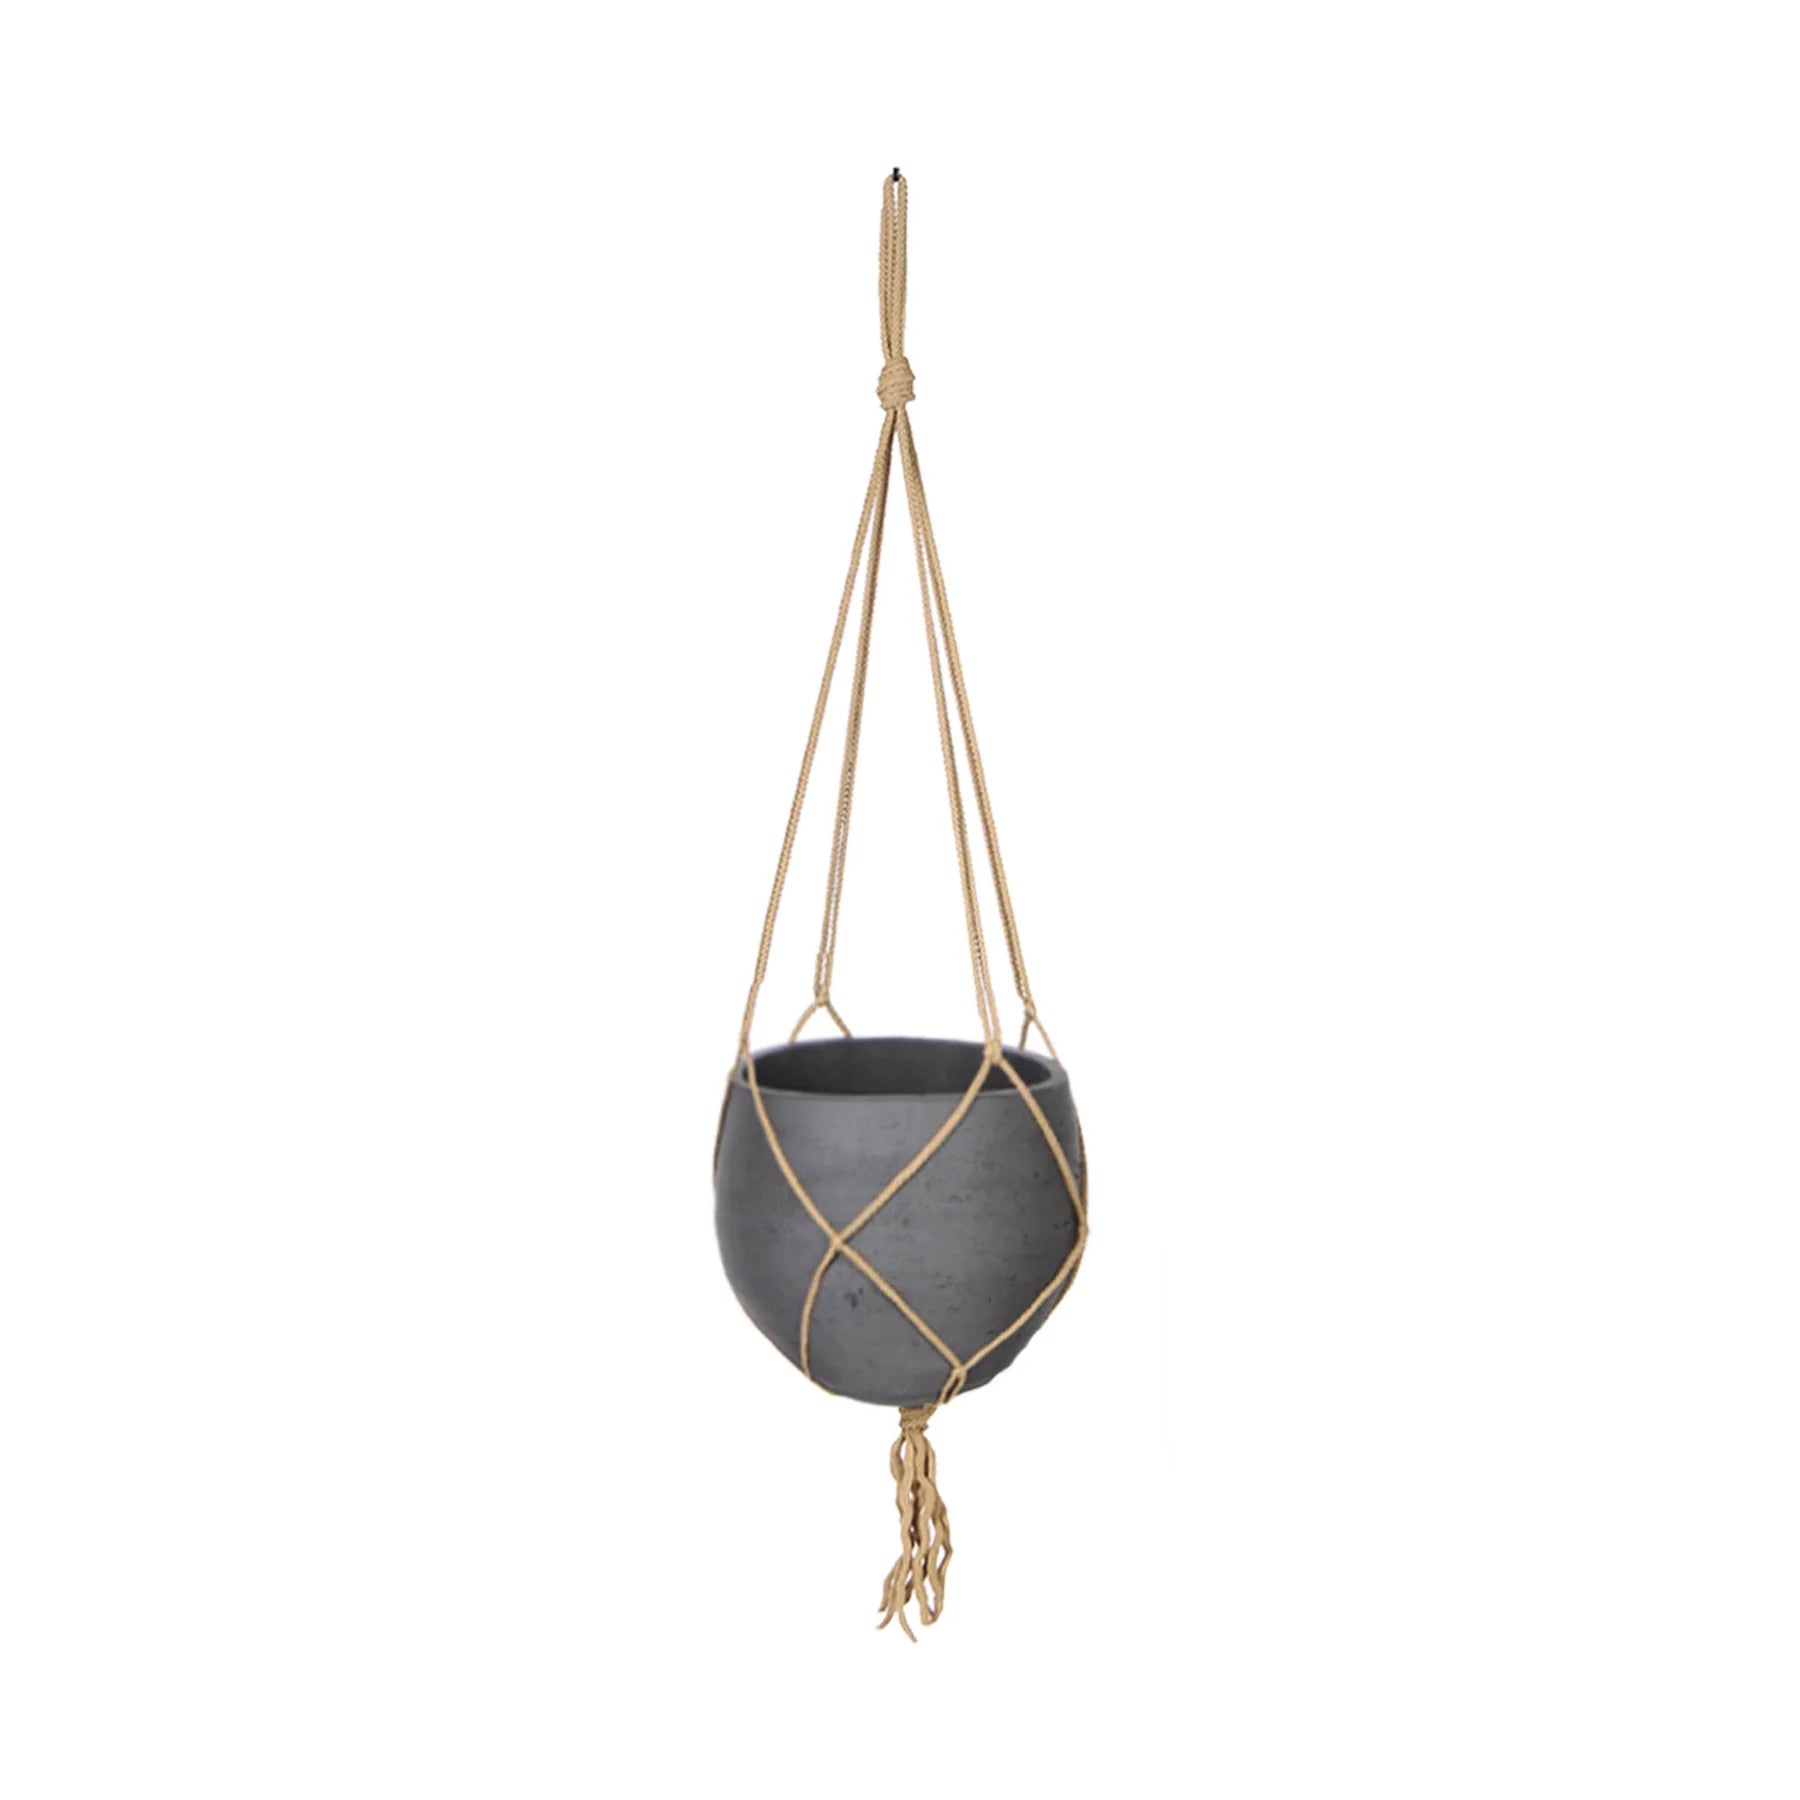 Picture of Craft Small Hanging Pot With Netting - Charcoal Grey